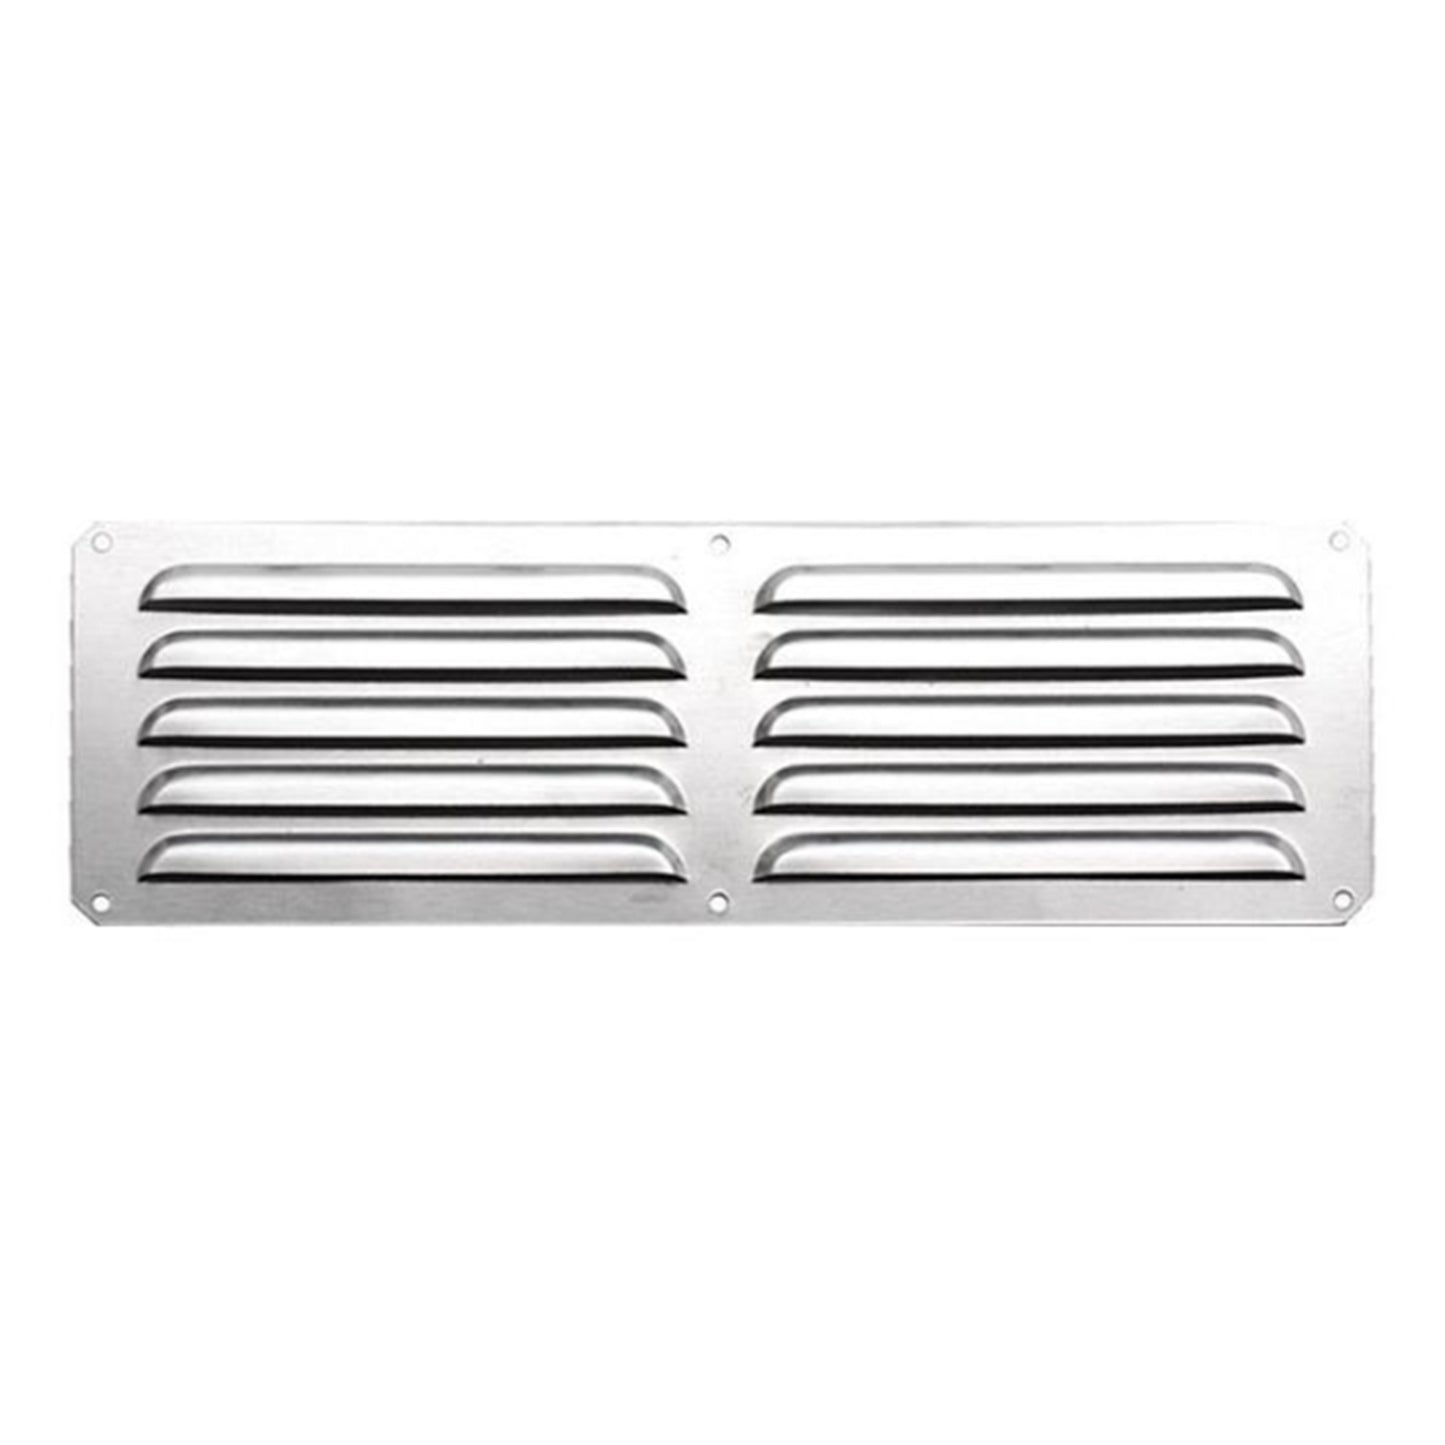 Summerset Grills 14-Inch Stainless Steel Island Vent Panel